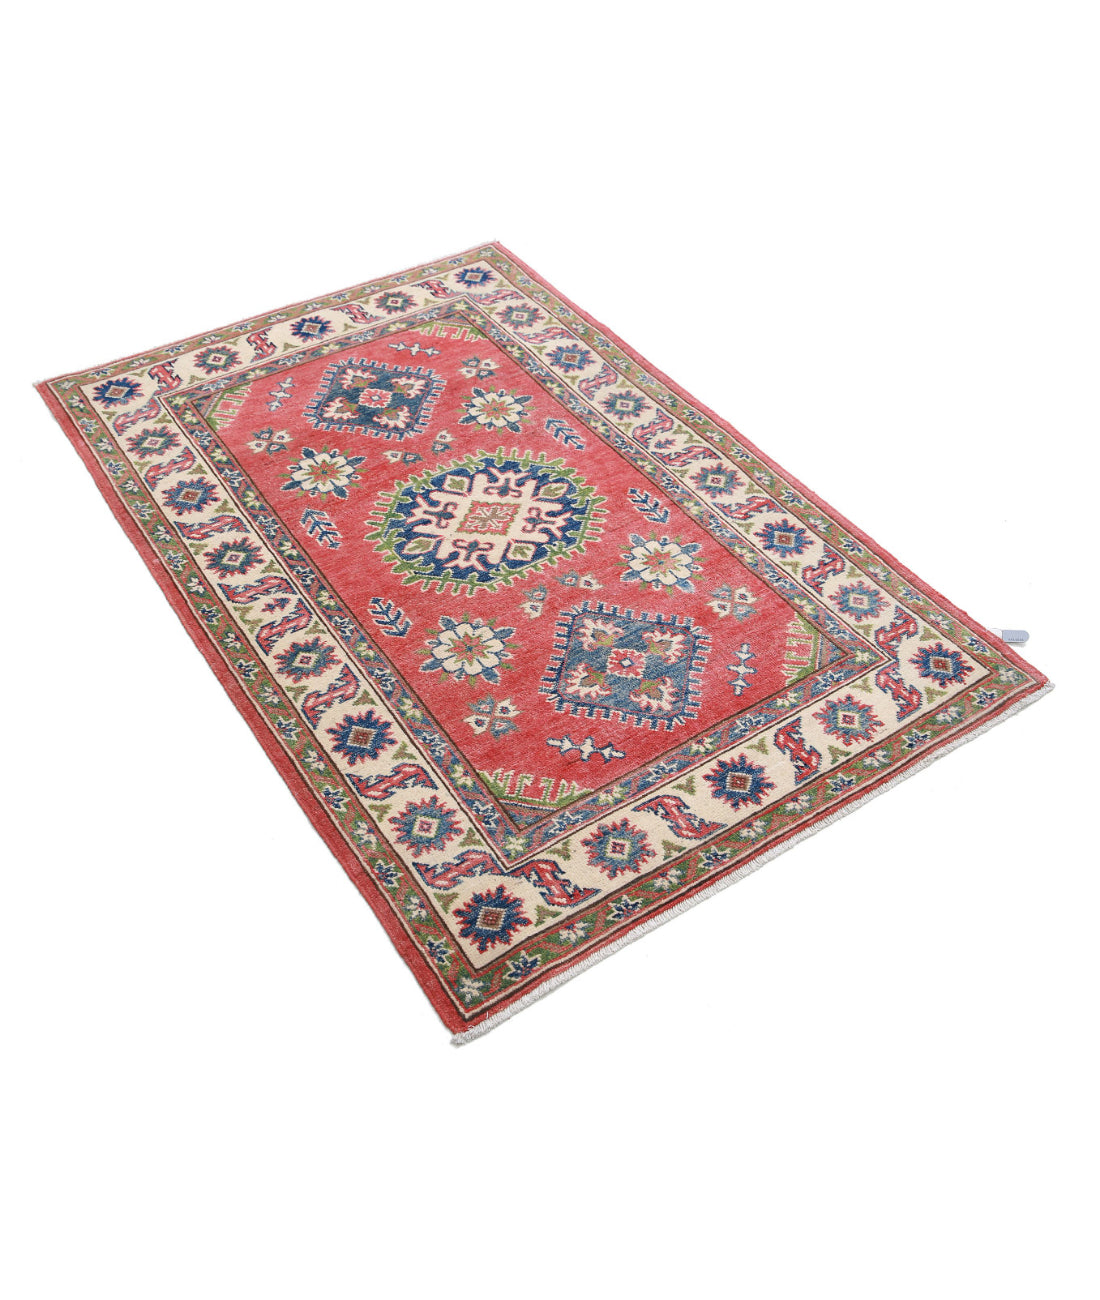 Hand Knotted Tribal Kazak Wool Rug - 3'3'' x 4'10'' 3'3'' x 4'10'' (98 X 145) / Red / Ivory